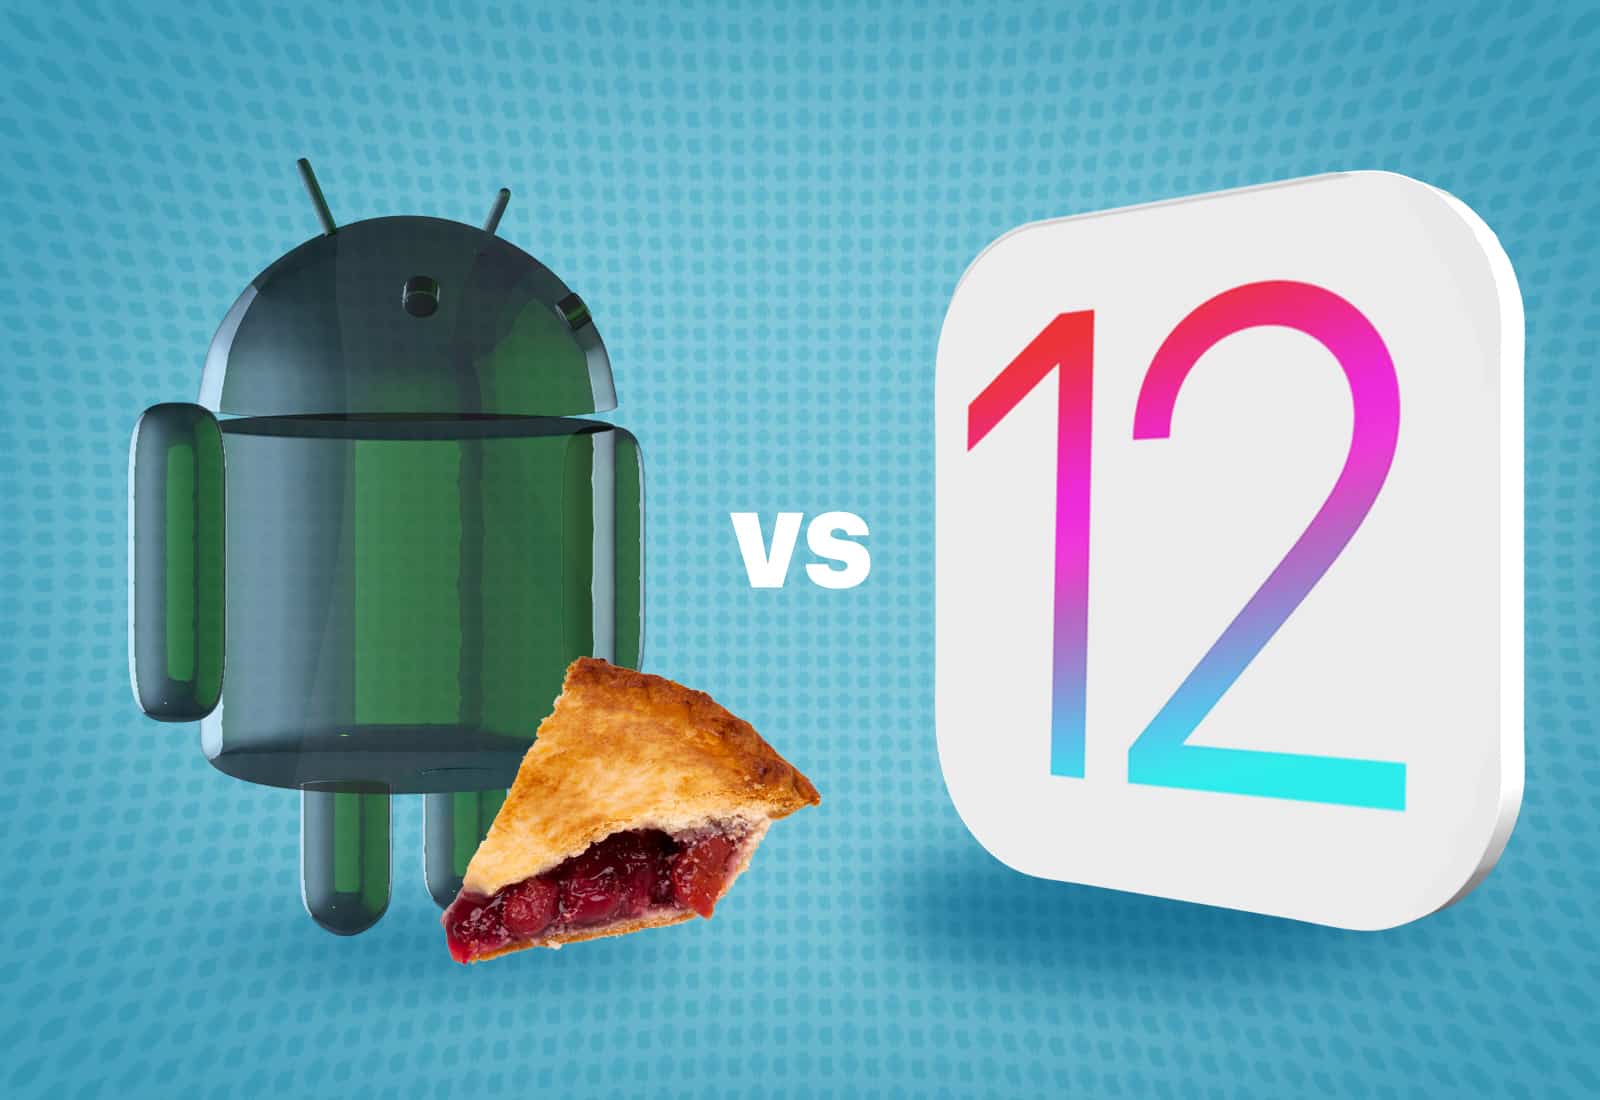 Which wins the features arms race, Android 9 Pie vs. iOS 12? Here's how they compare.